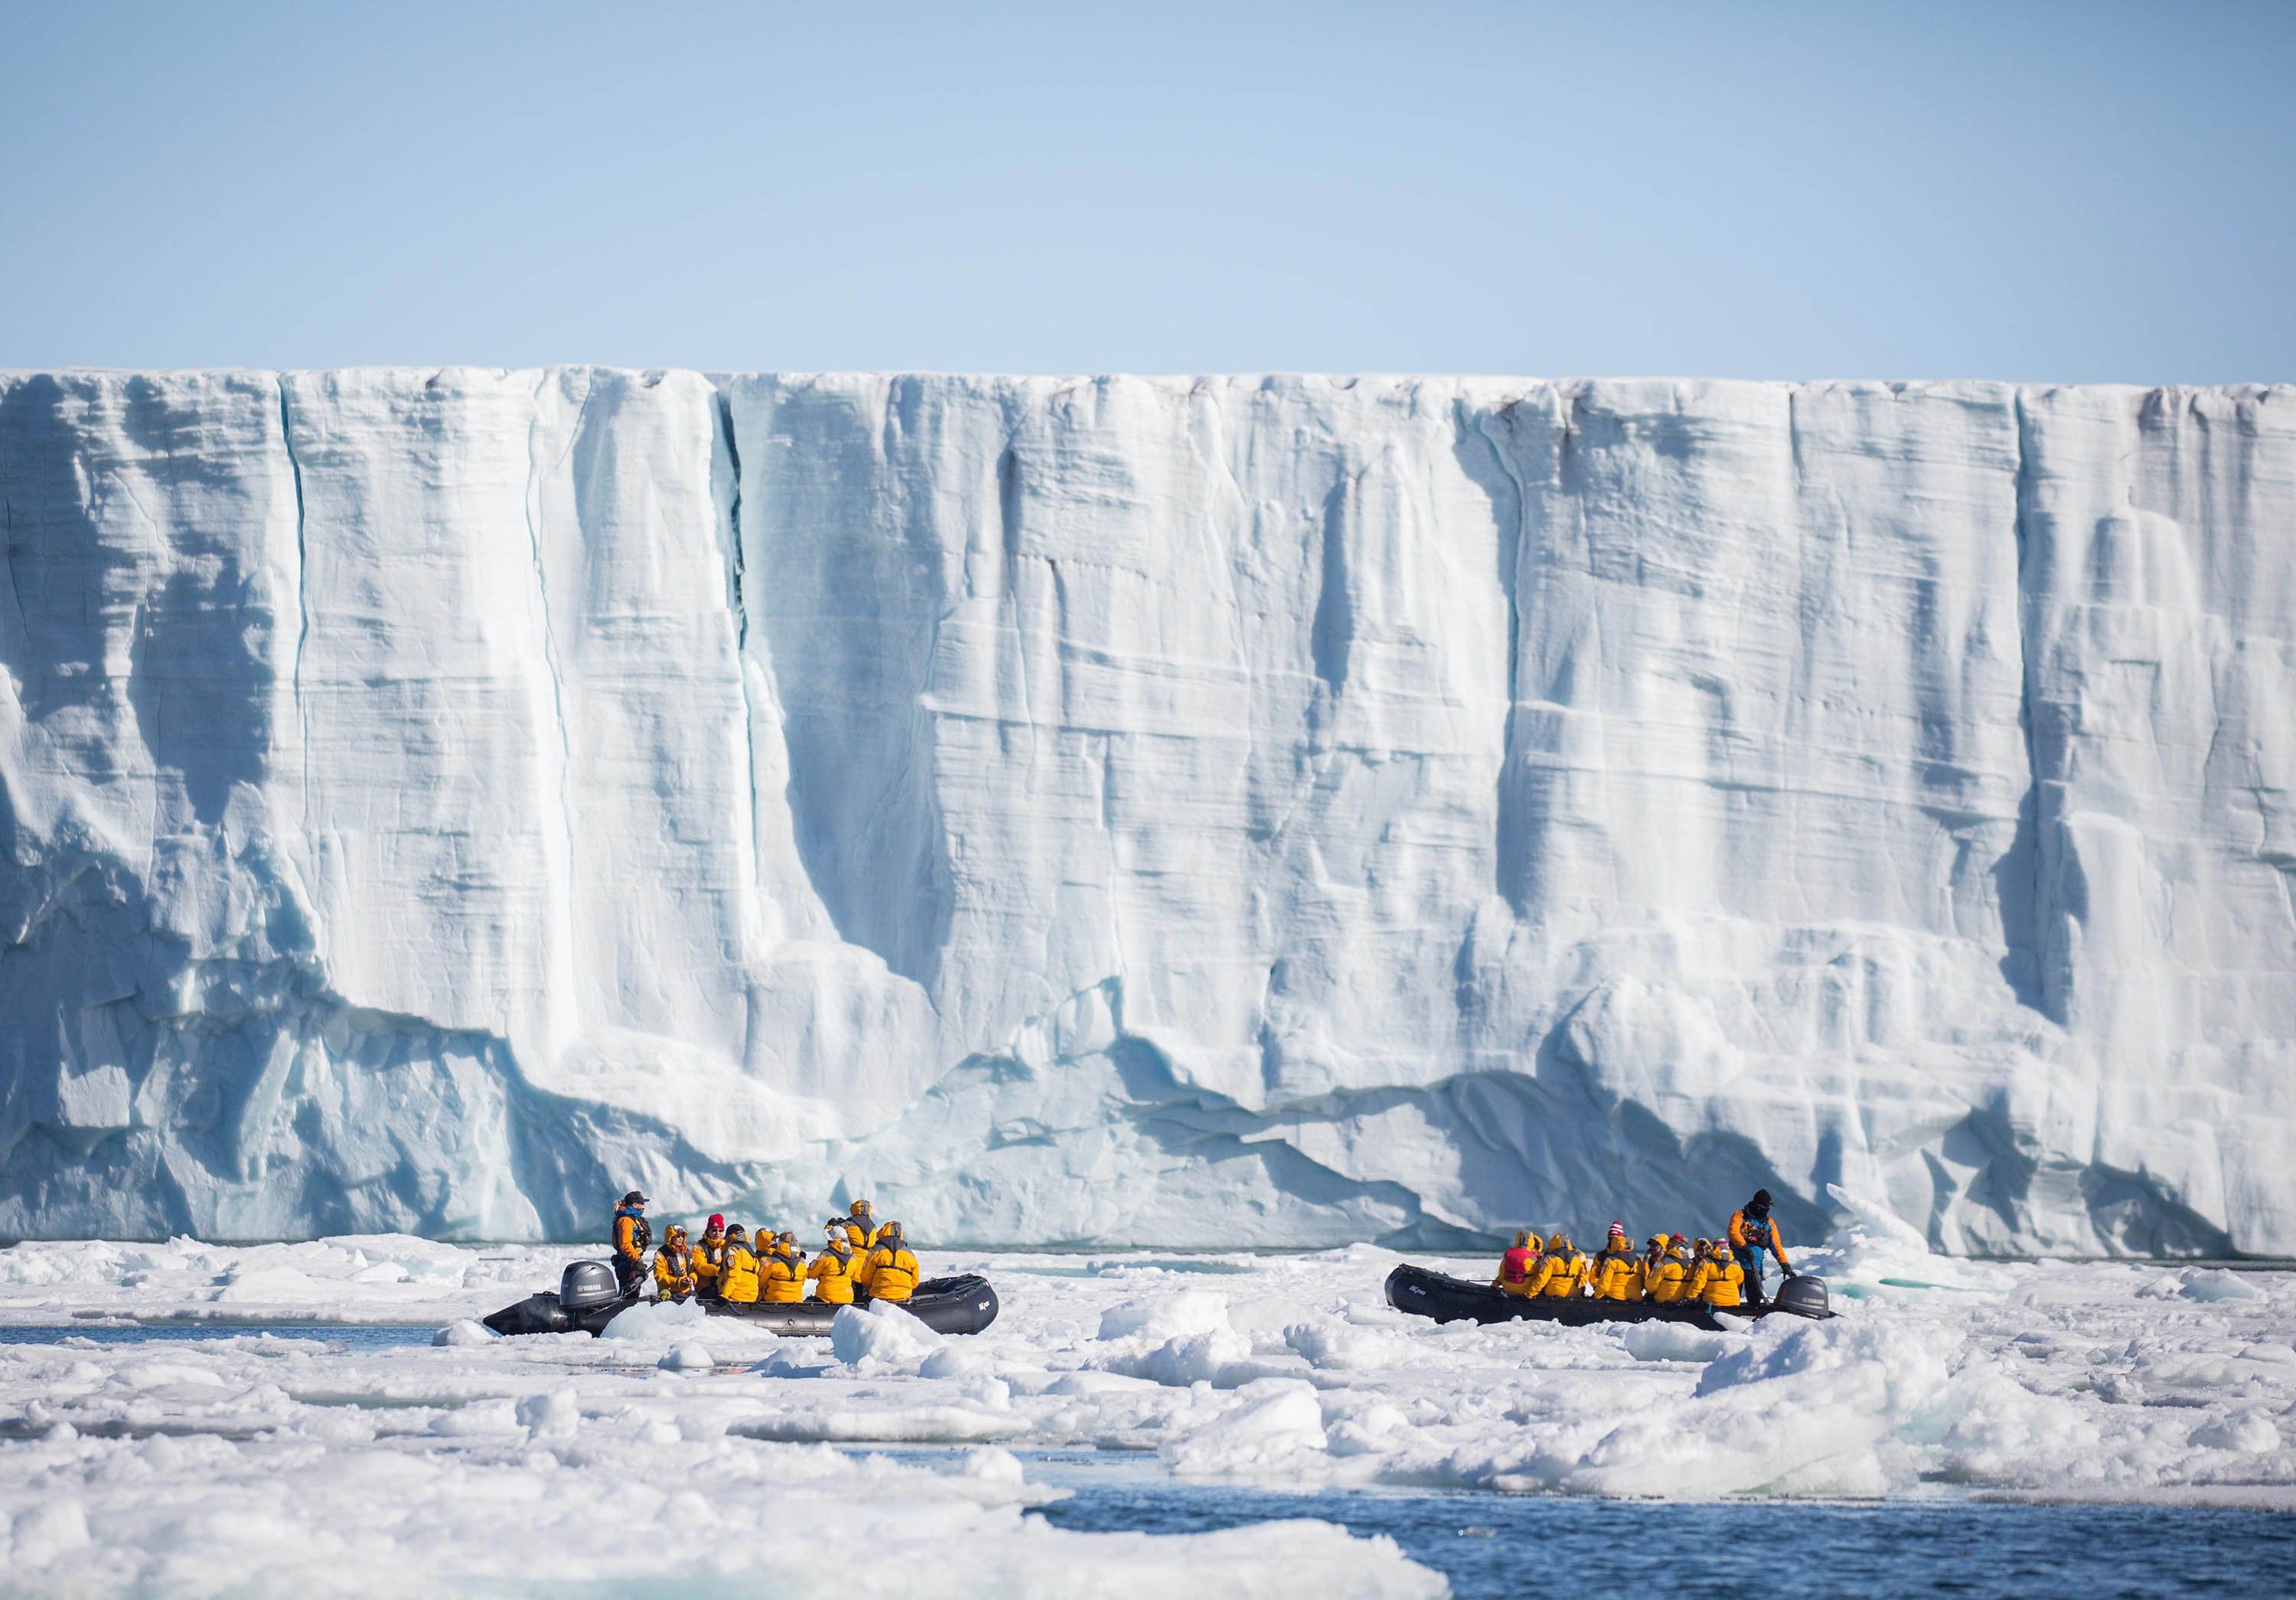 Quark Expeditions guests get a close-up view of a tabular iceberg in Svalbard